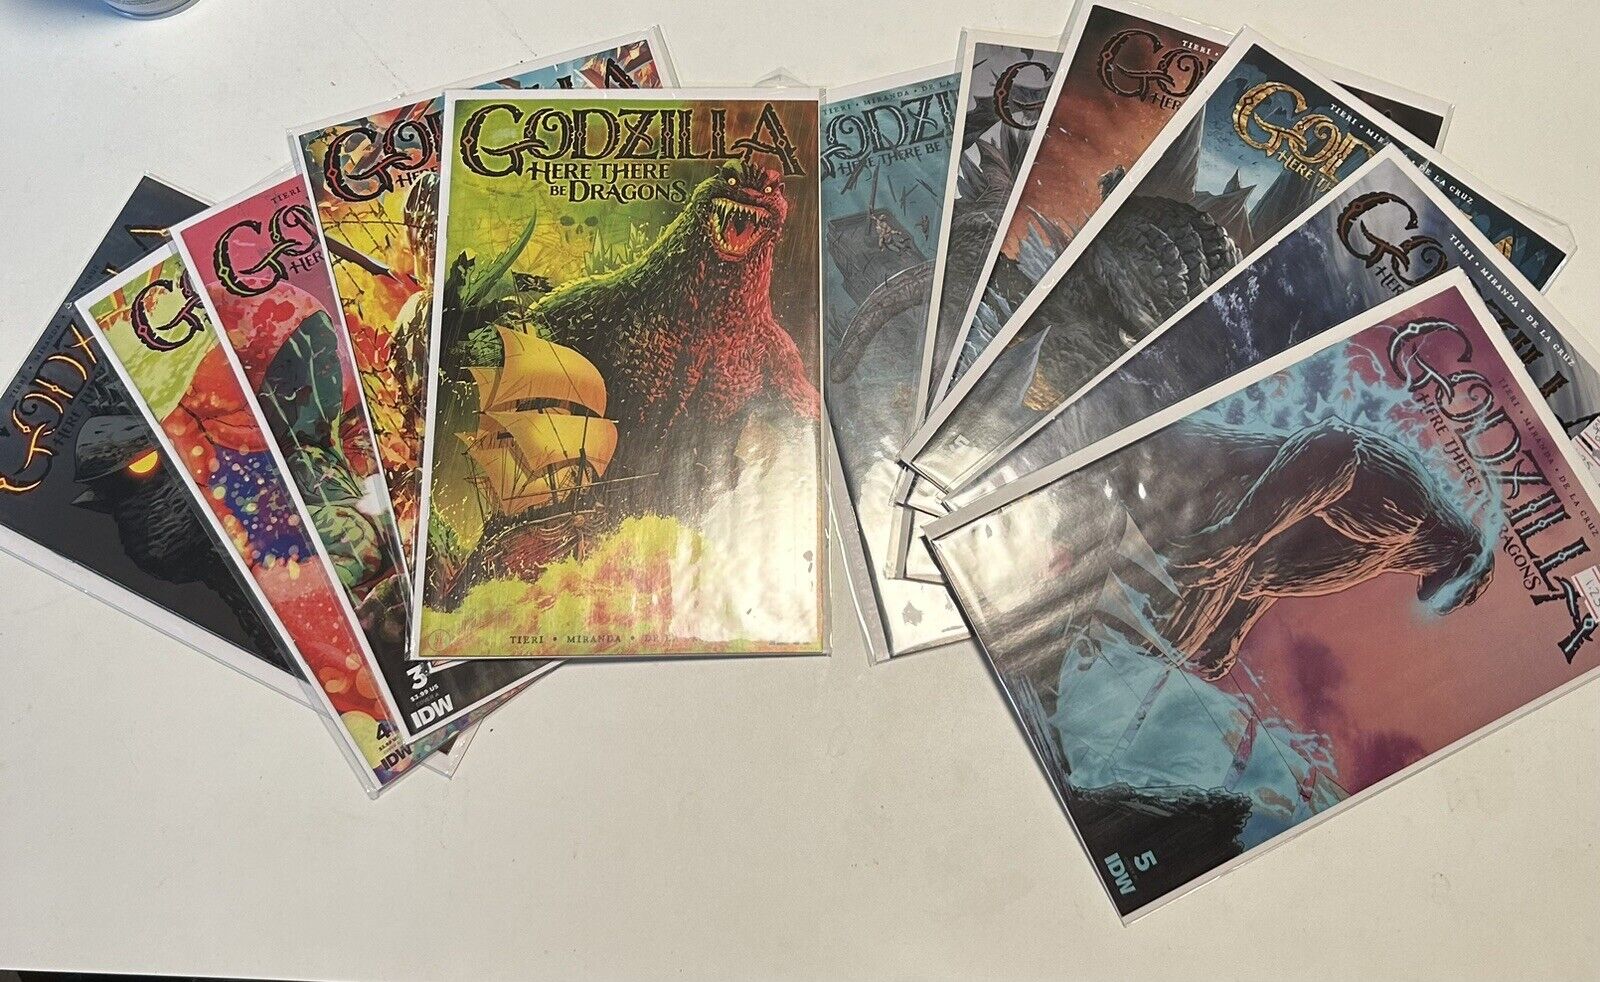 Godzilla: Here There Be Dragons #1-5 VF/NM complete series IDW all A variants